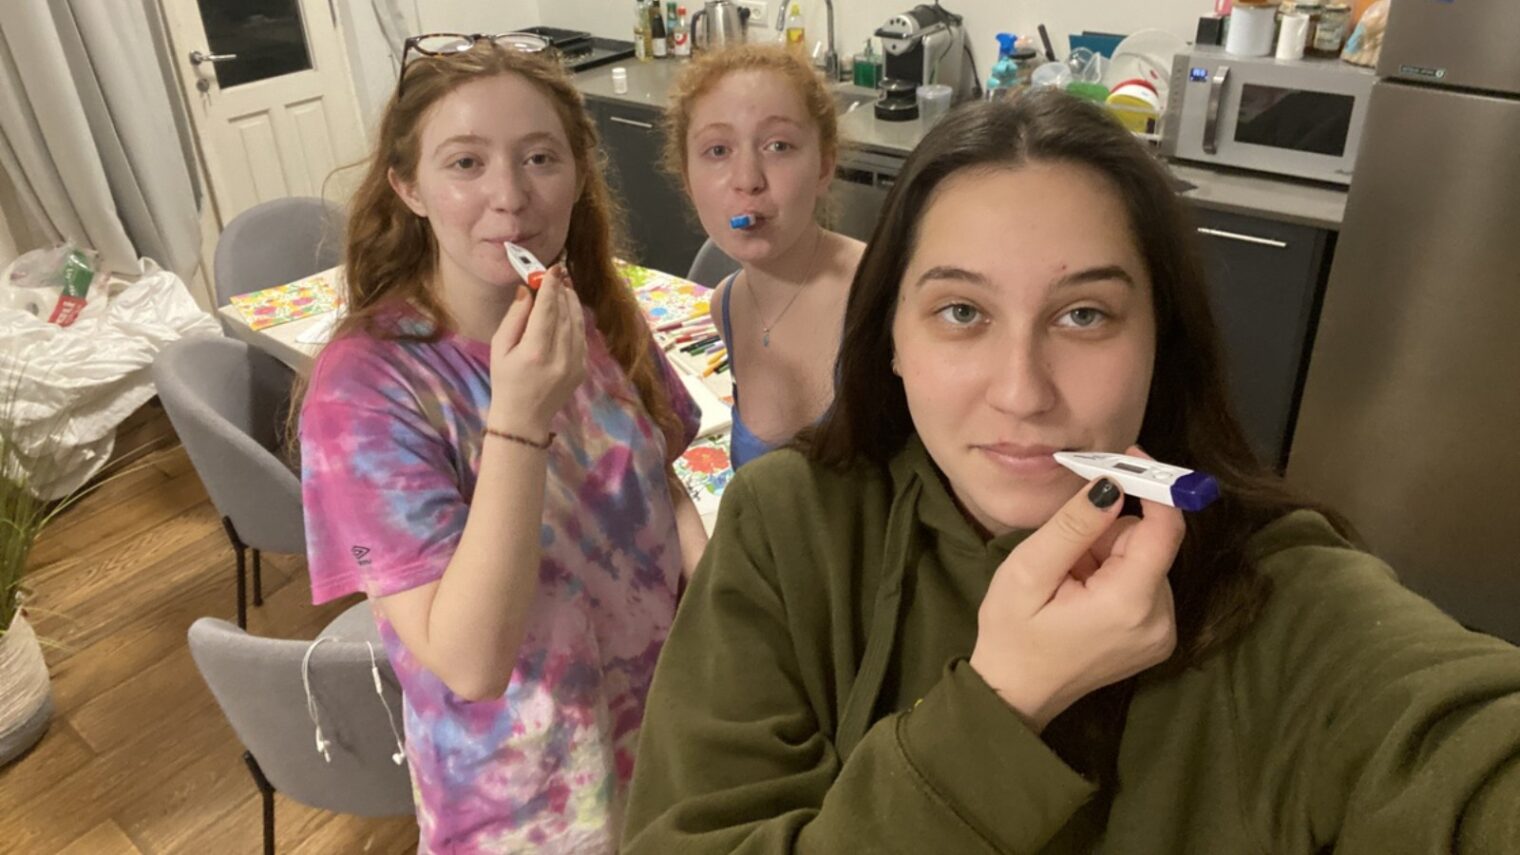 Danya Belkin, right, took this selfie of she and fellow gap-year friends co-quarantining.